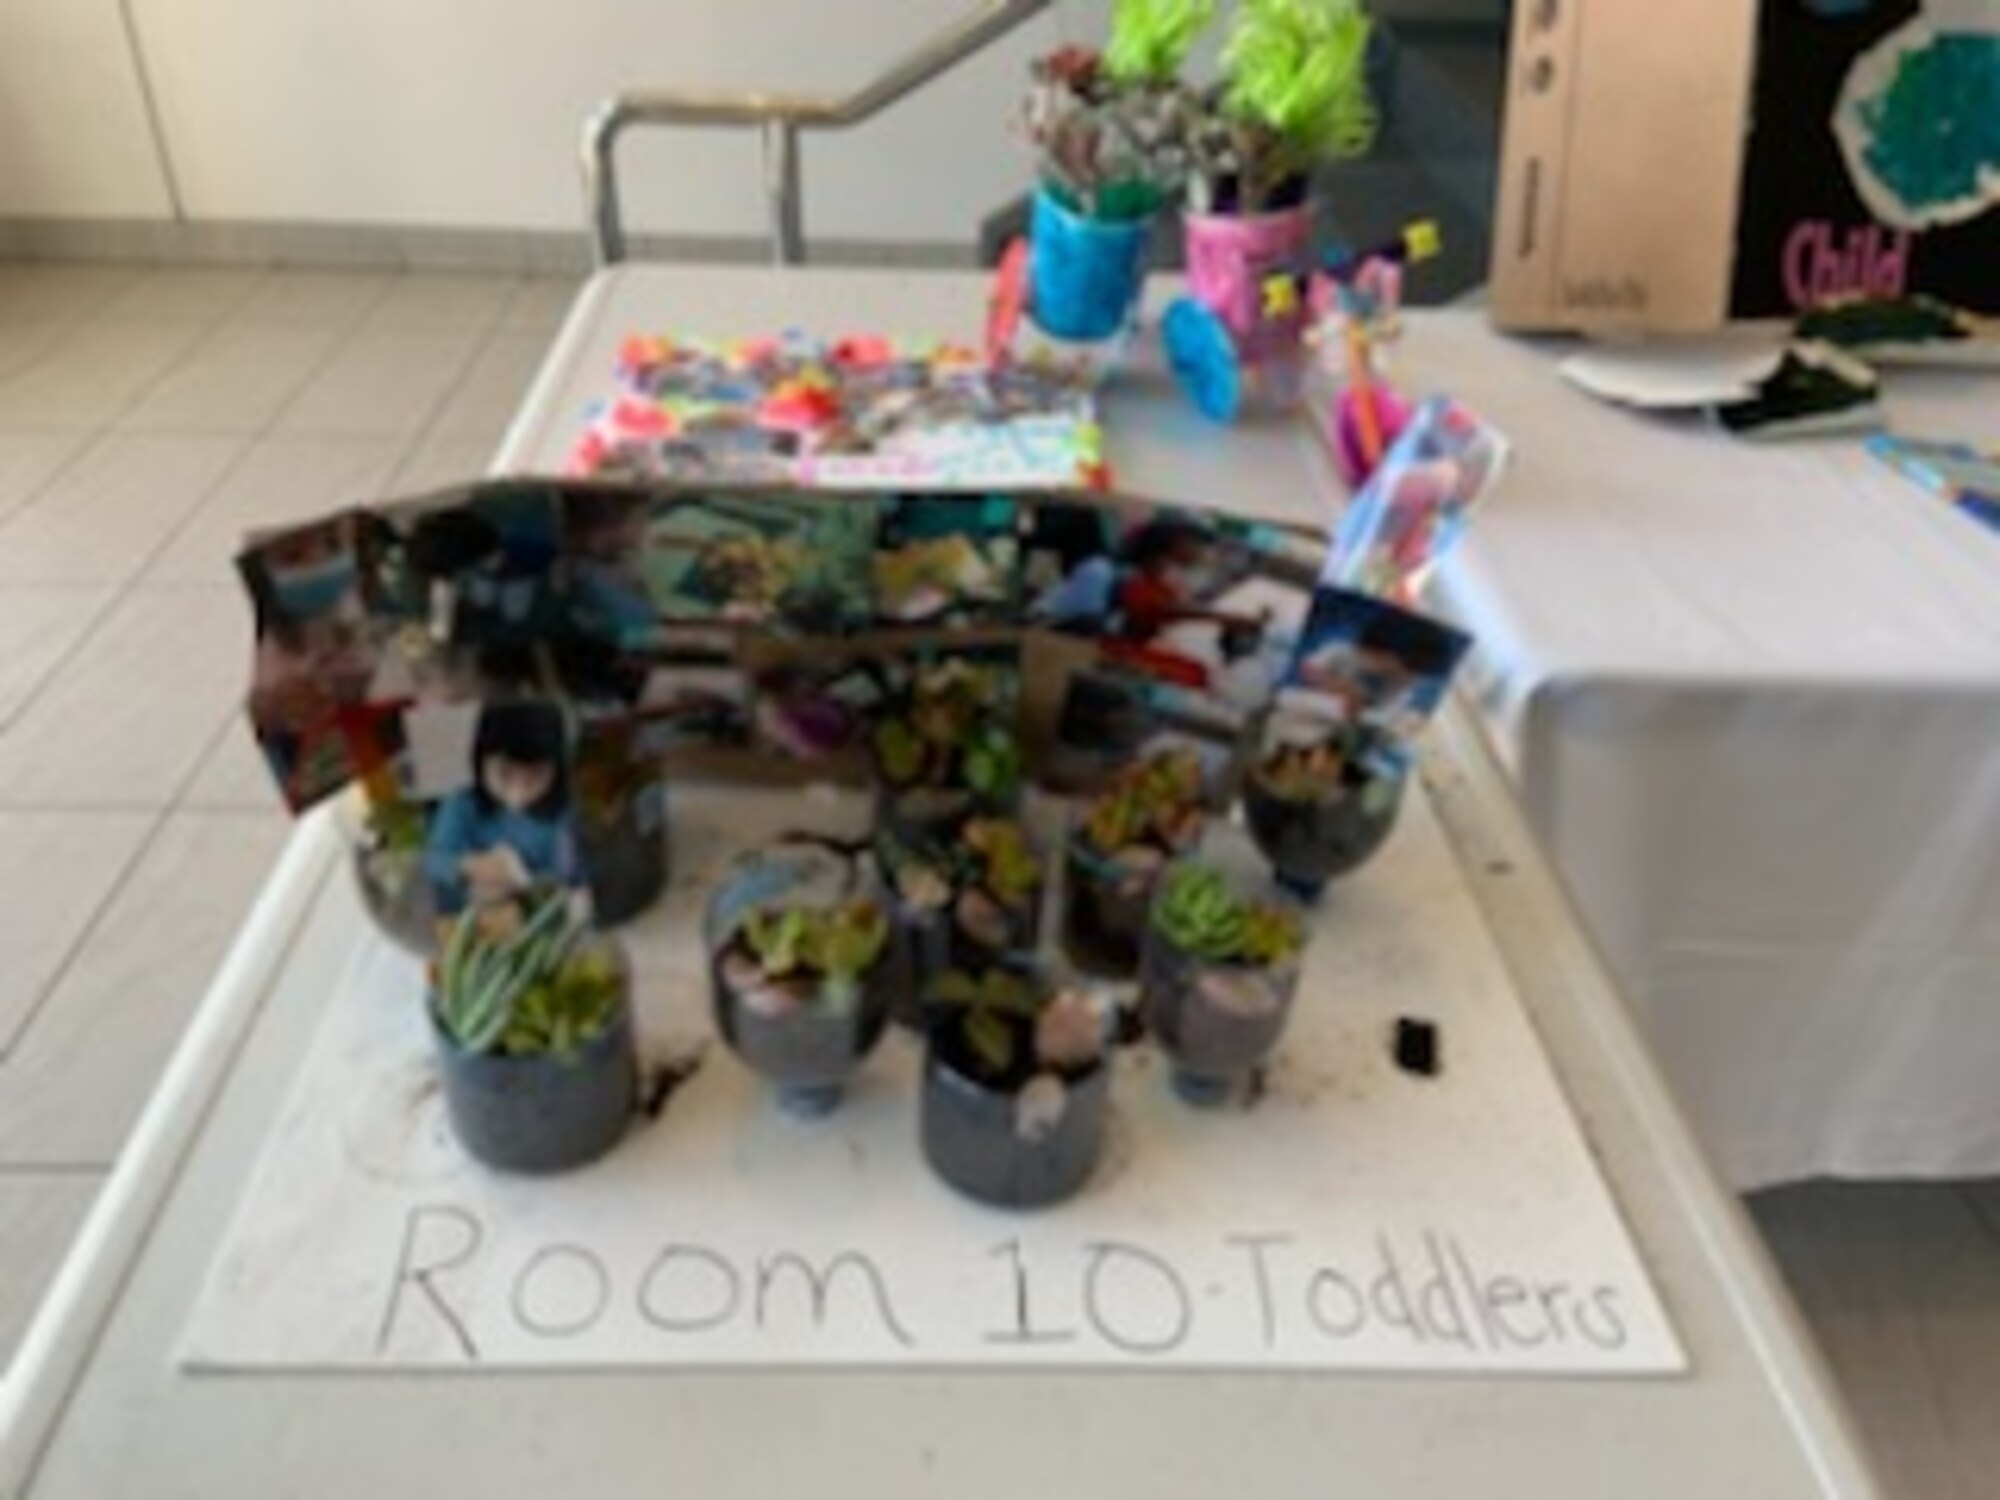 In honor of Earth Day last month, the Child Development Center and the 61st Civil Engineering and Logistics Squadron provided a fun way to develop awareness for saving the planet through building colorful and informative dioramas and planting flowers.